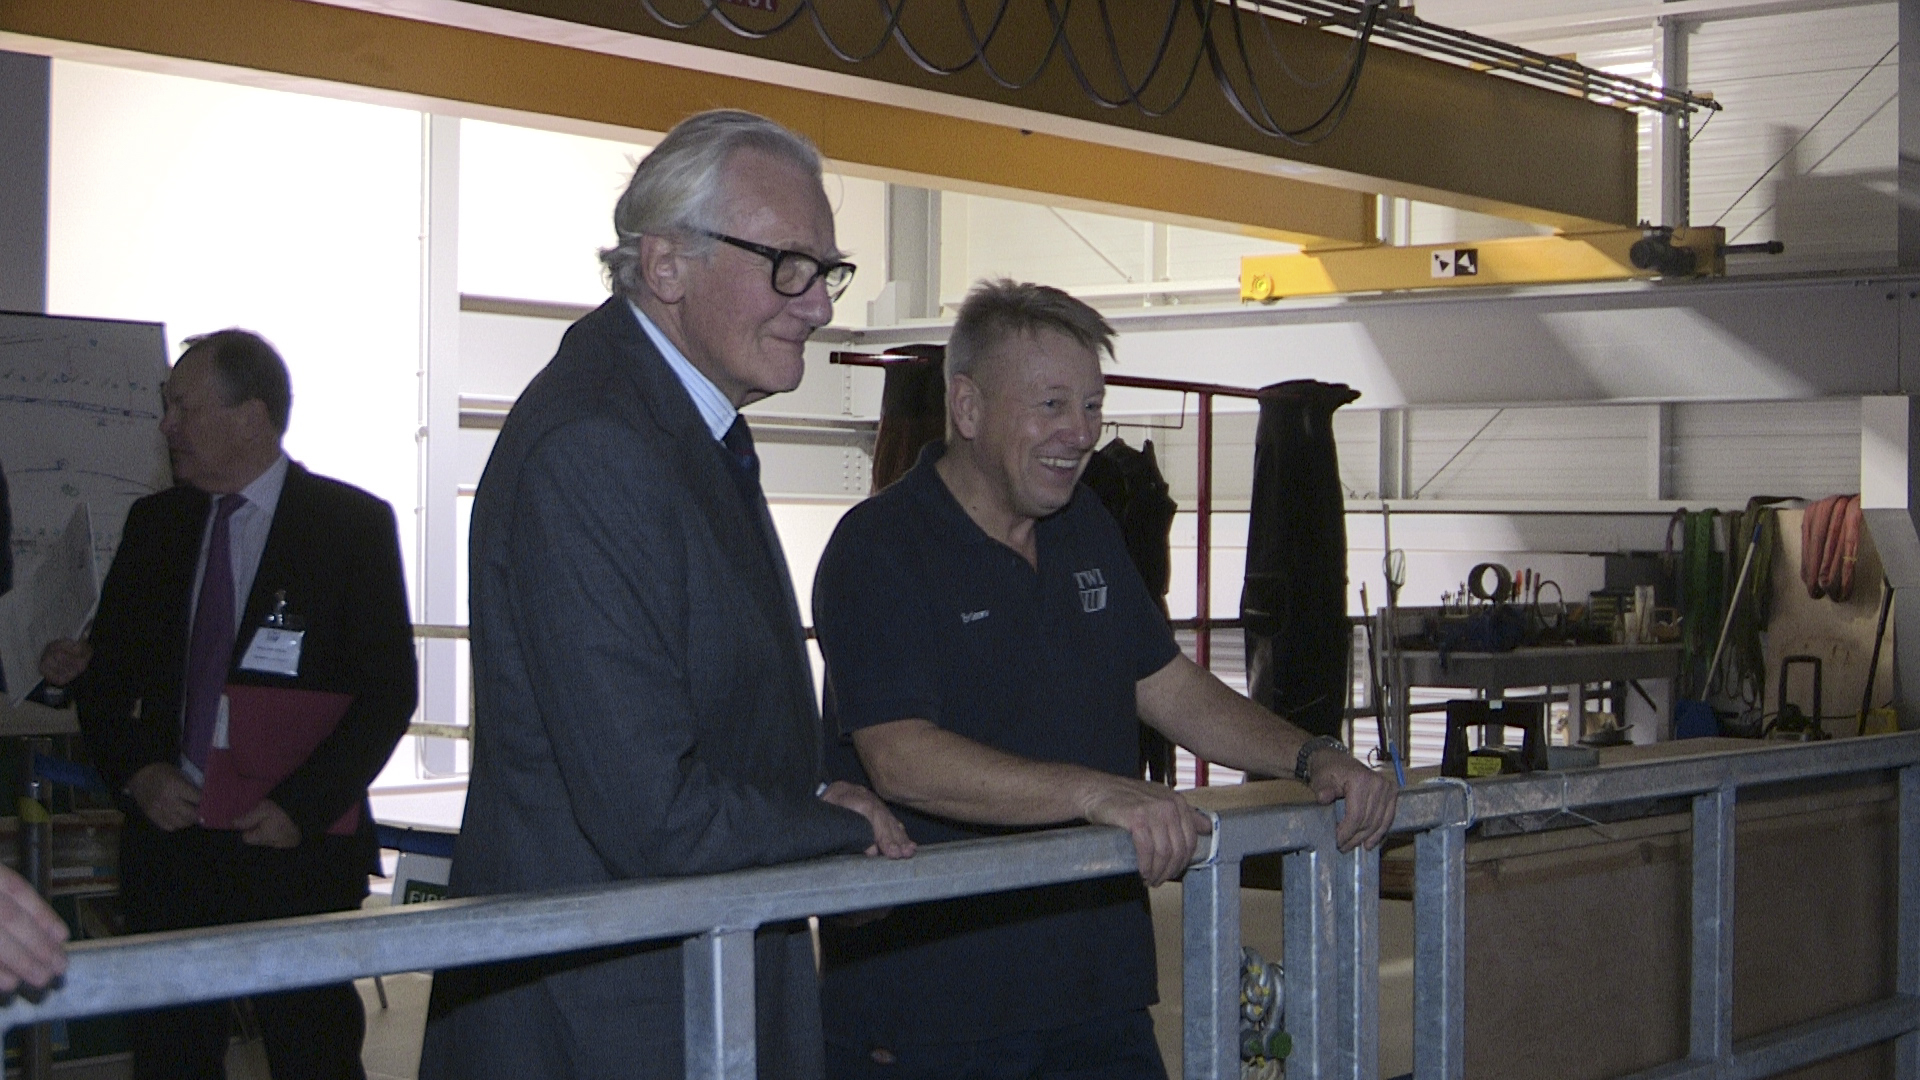 TWI's Brian Mulrooney shows Lord Heseltine the facility's diver training tank